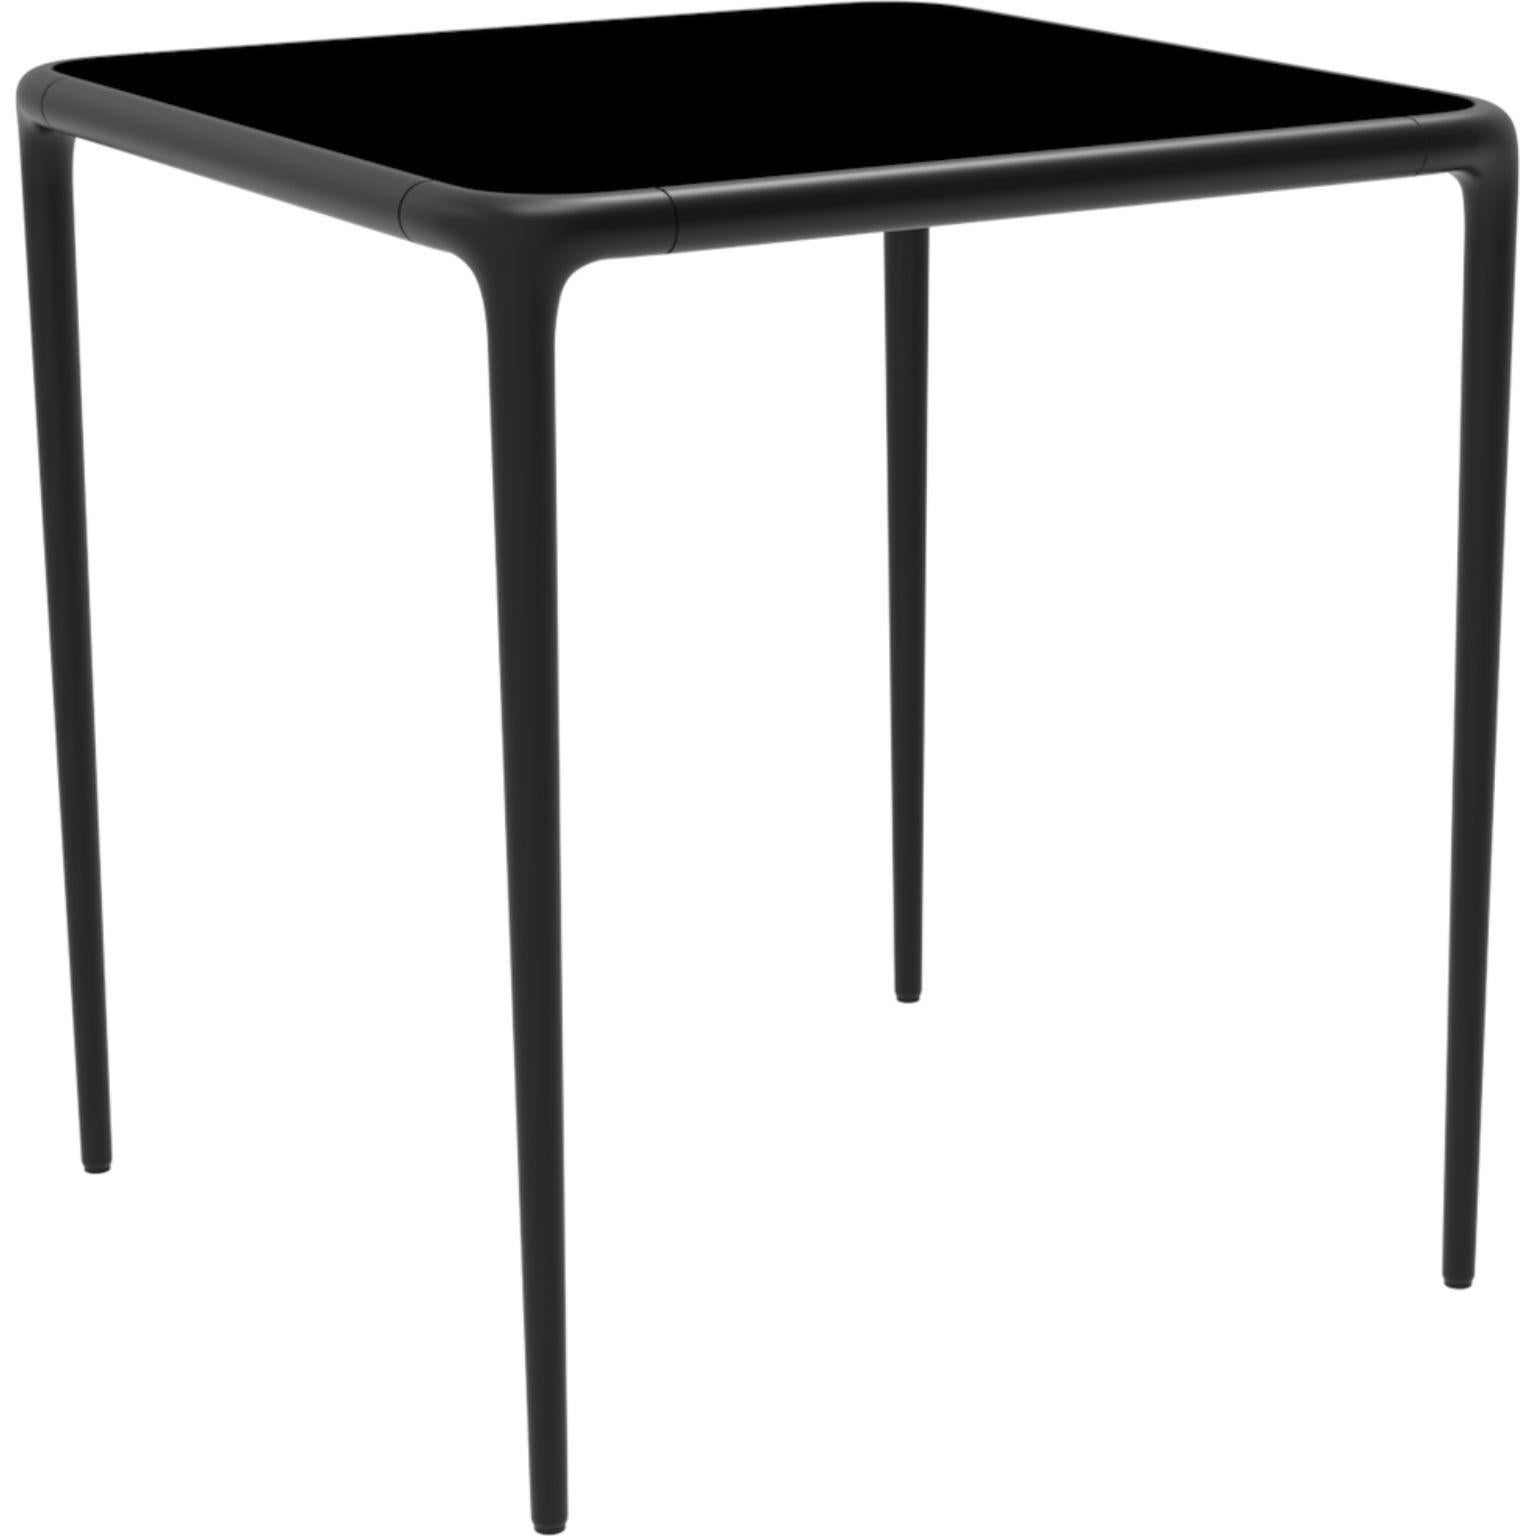 Xaloc black glass top table 70 by MOWEE
Dimensions: D70 x W70 x H74 cm
Material: Aluminum, tinted tempered glass top.
Also available in different aluminum colors and finishes (HPL Black Edge or Neolith). 

Xaloc synthesizes the lines of